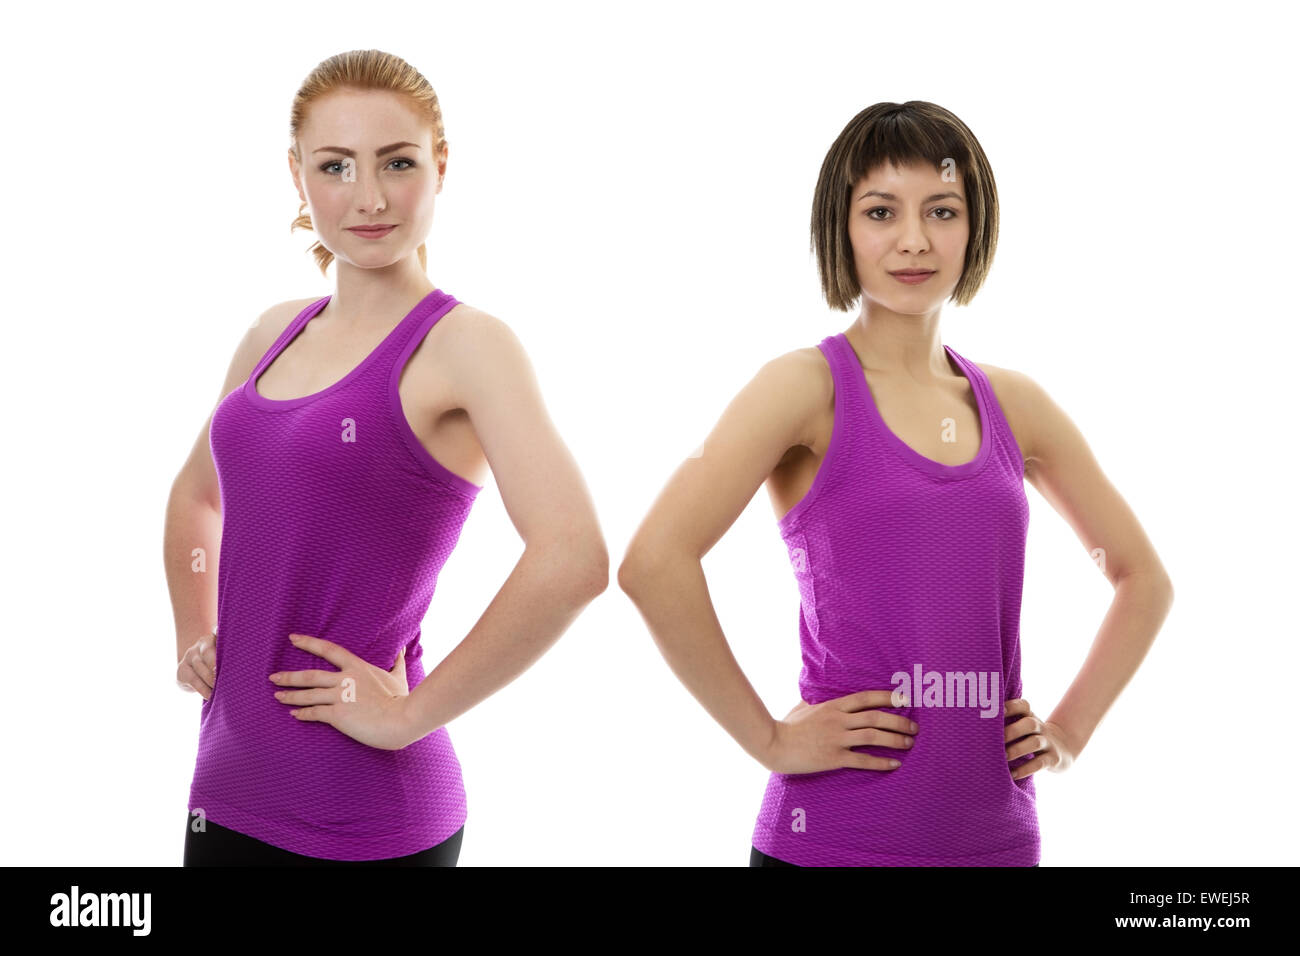 two fitness model wearing gym clothes Stock Photo